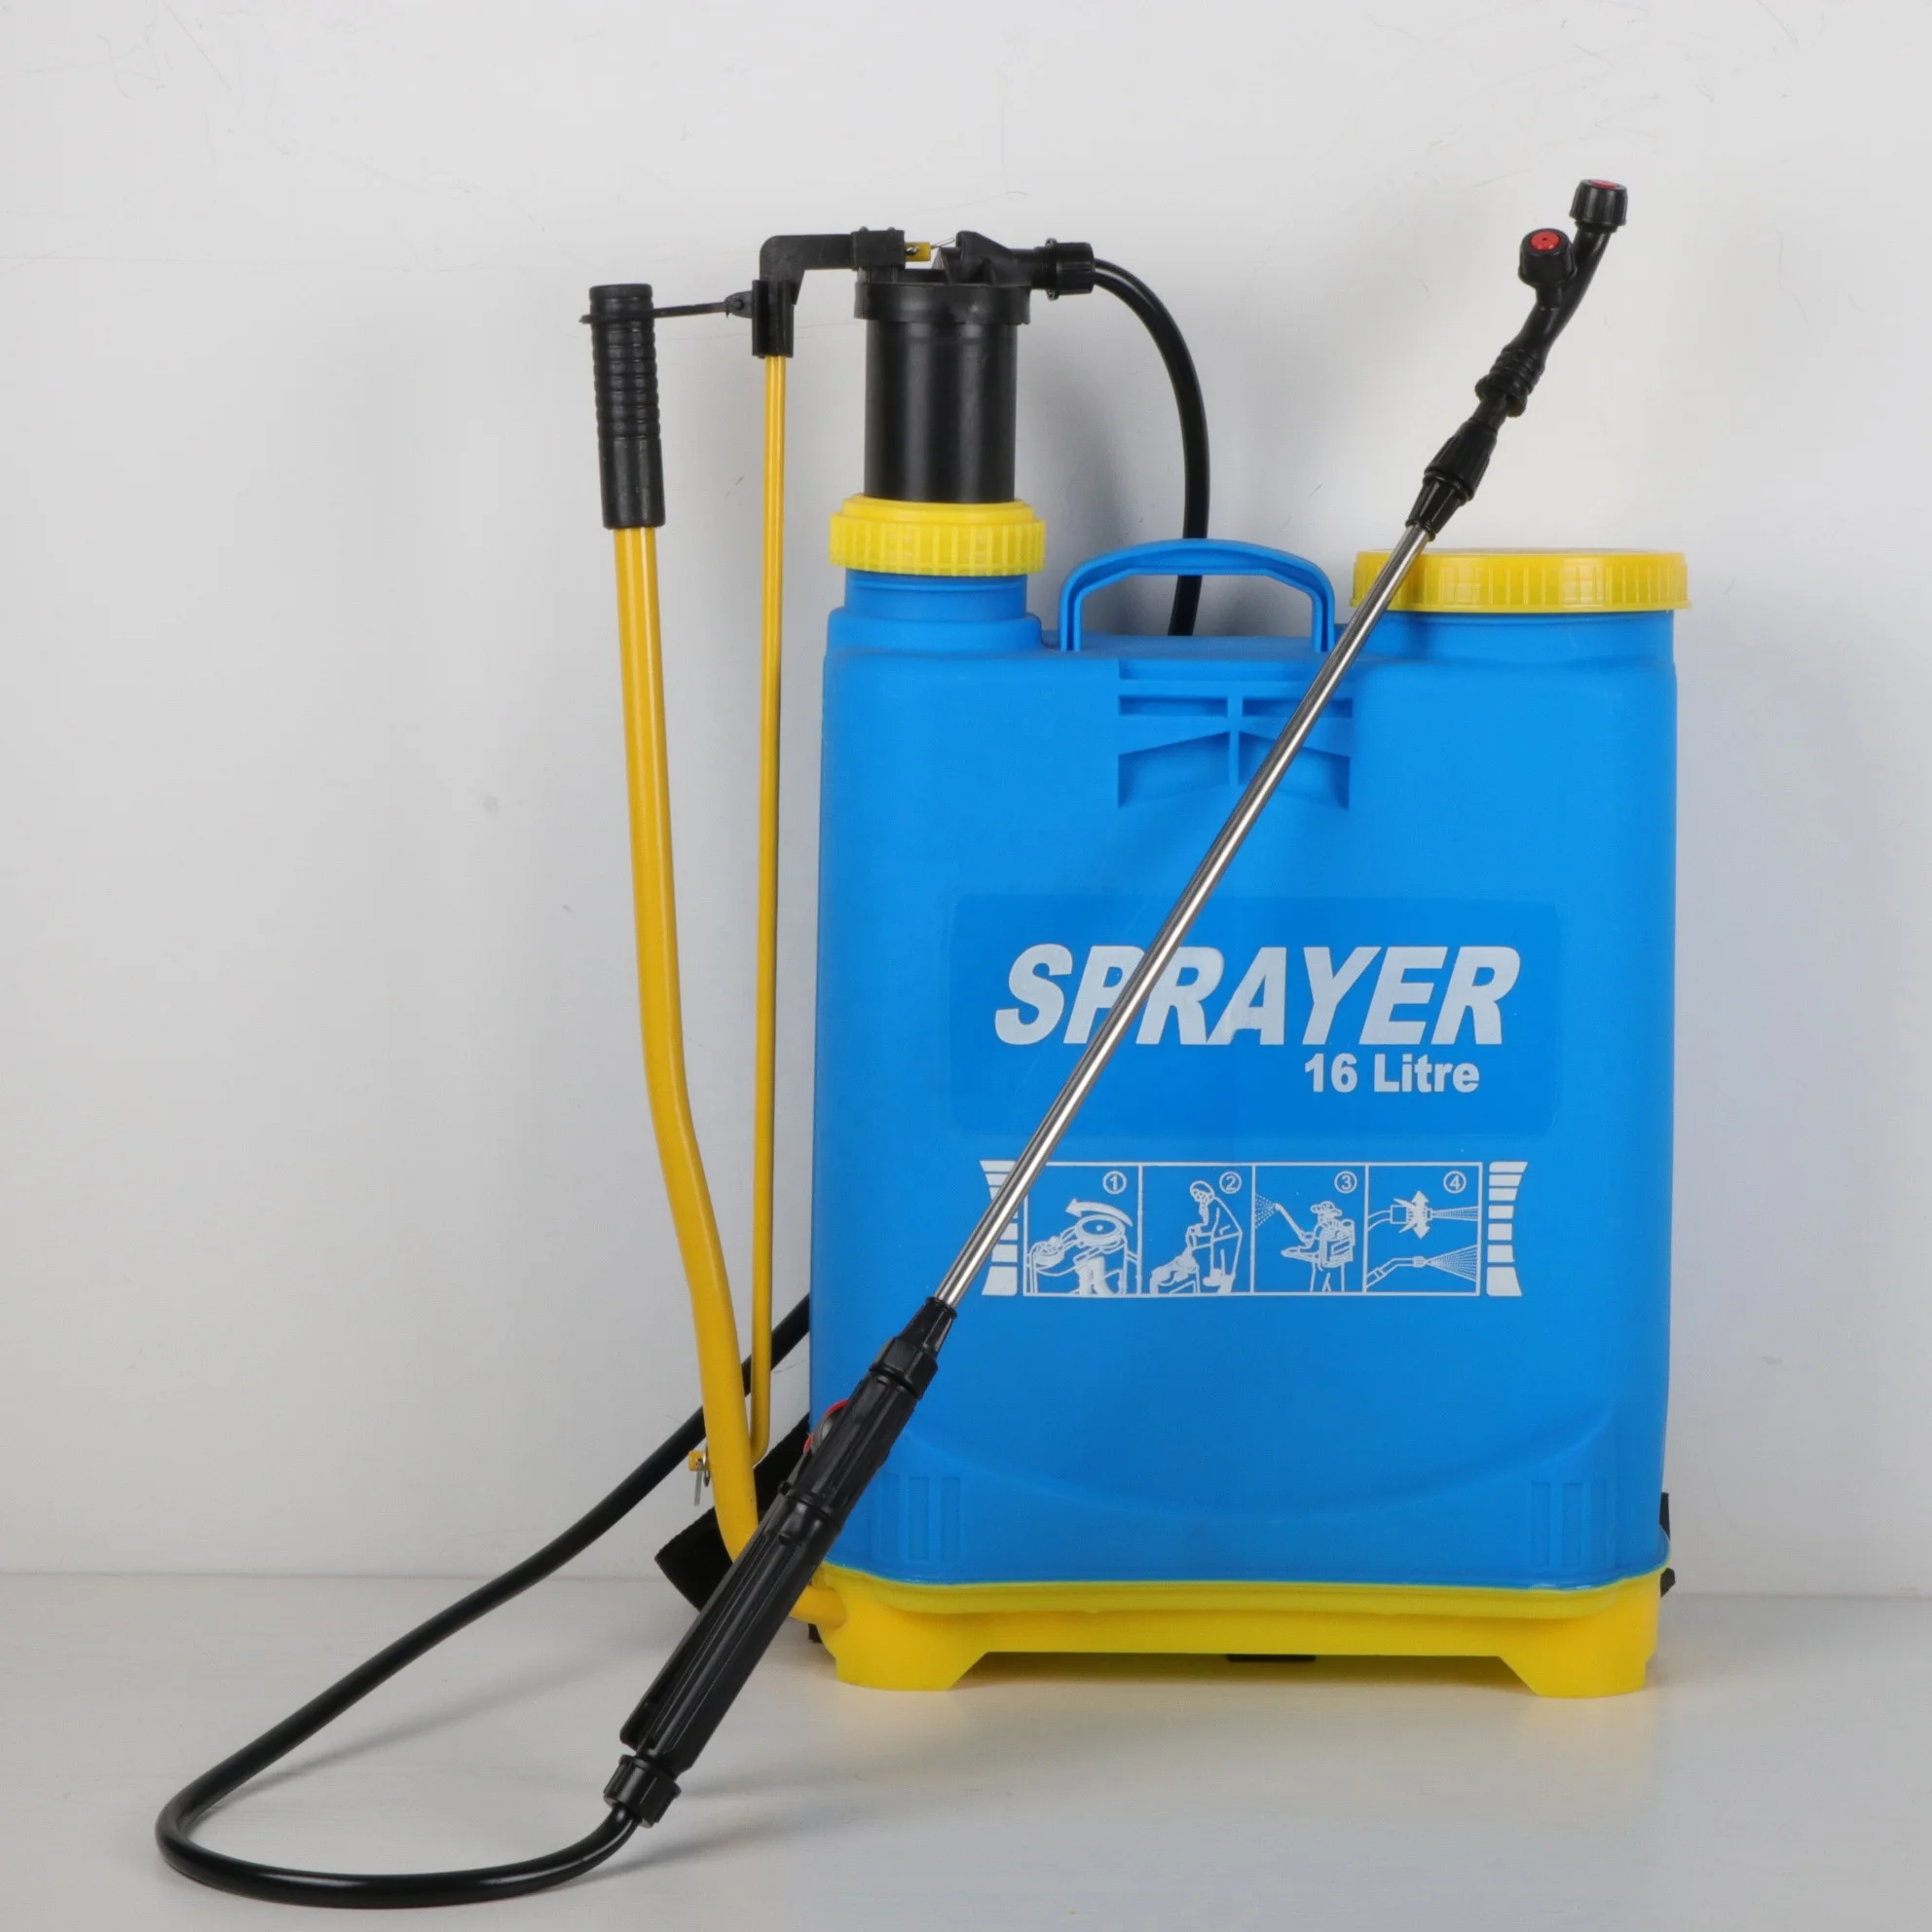 

Sprayer Agriculture Spray Pump Pest Control 16l Sprayer Agricultural Pressure Power Portable Plastic Three Nozzles for Free, Custom color available